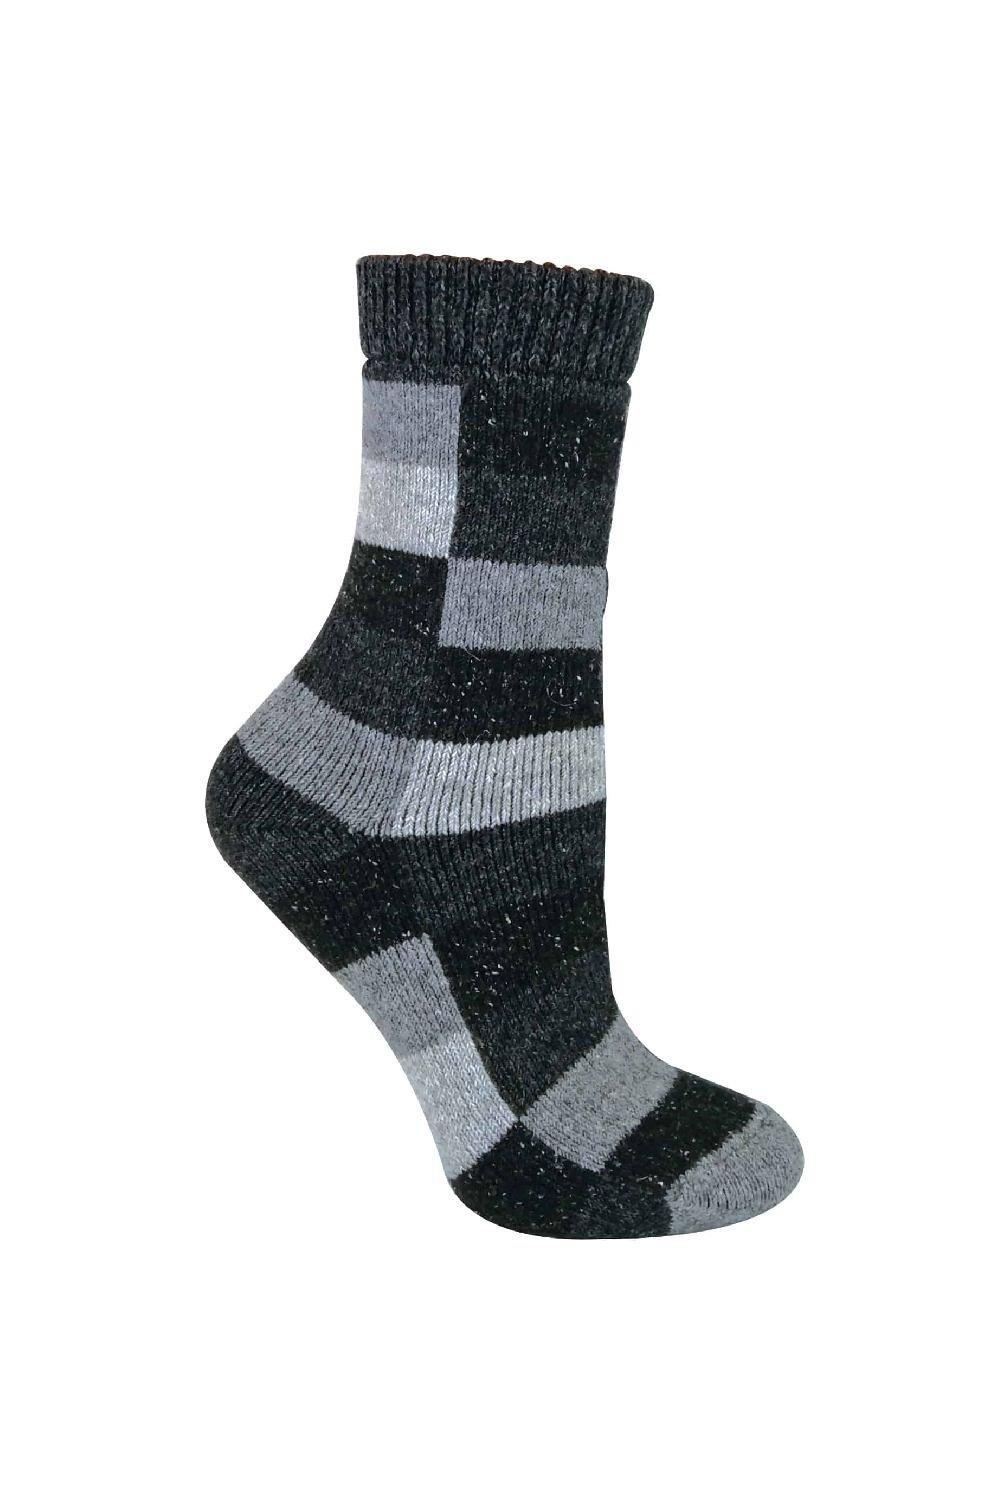 Warm Funky Checkered Patterned Breathable Wool Blend Socks